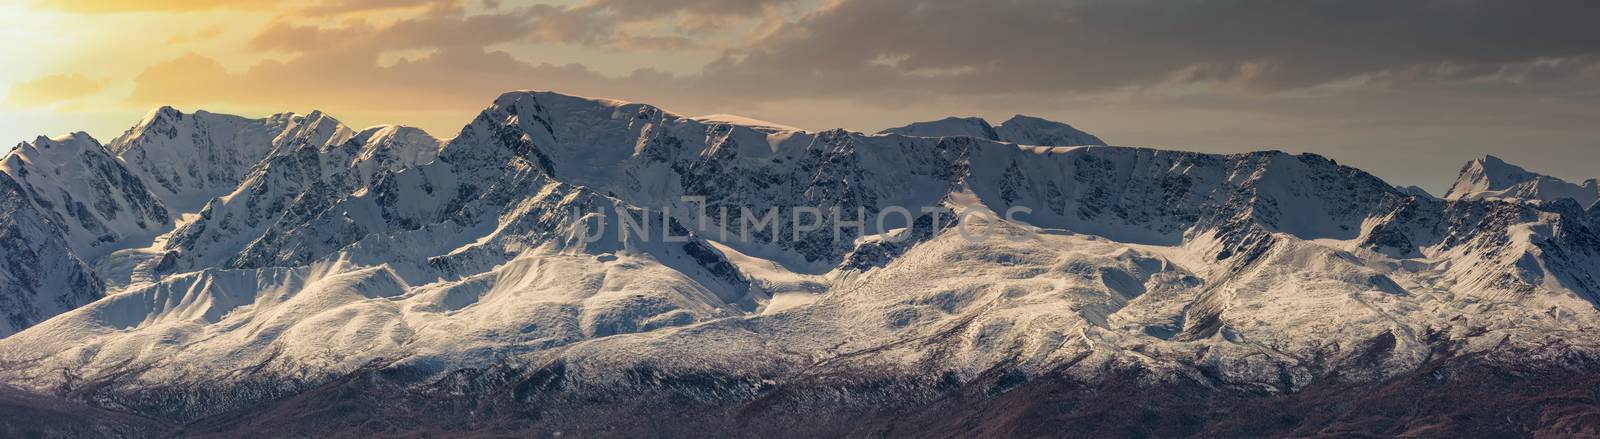 Scenic panoramic aerial view of snowy mountain peaks and slopes of North Chuyskiy ridge at sunset. Beautiful cloudy orange sky as a background. Altai mountains, Siberia, Russia by DamantisZ